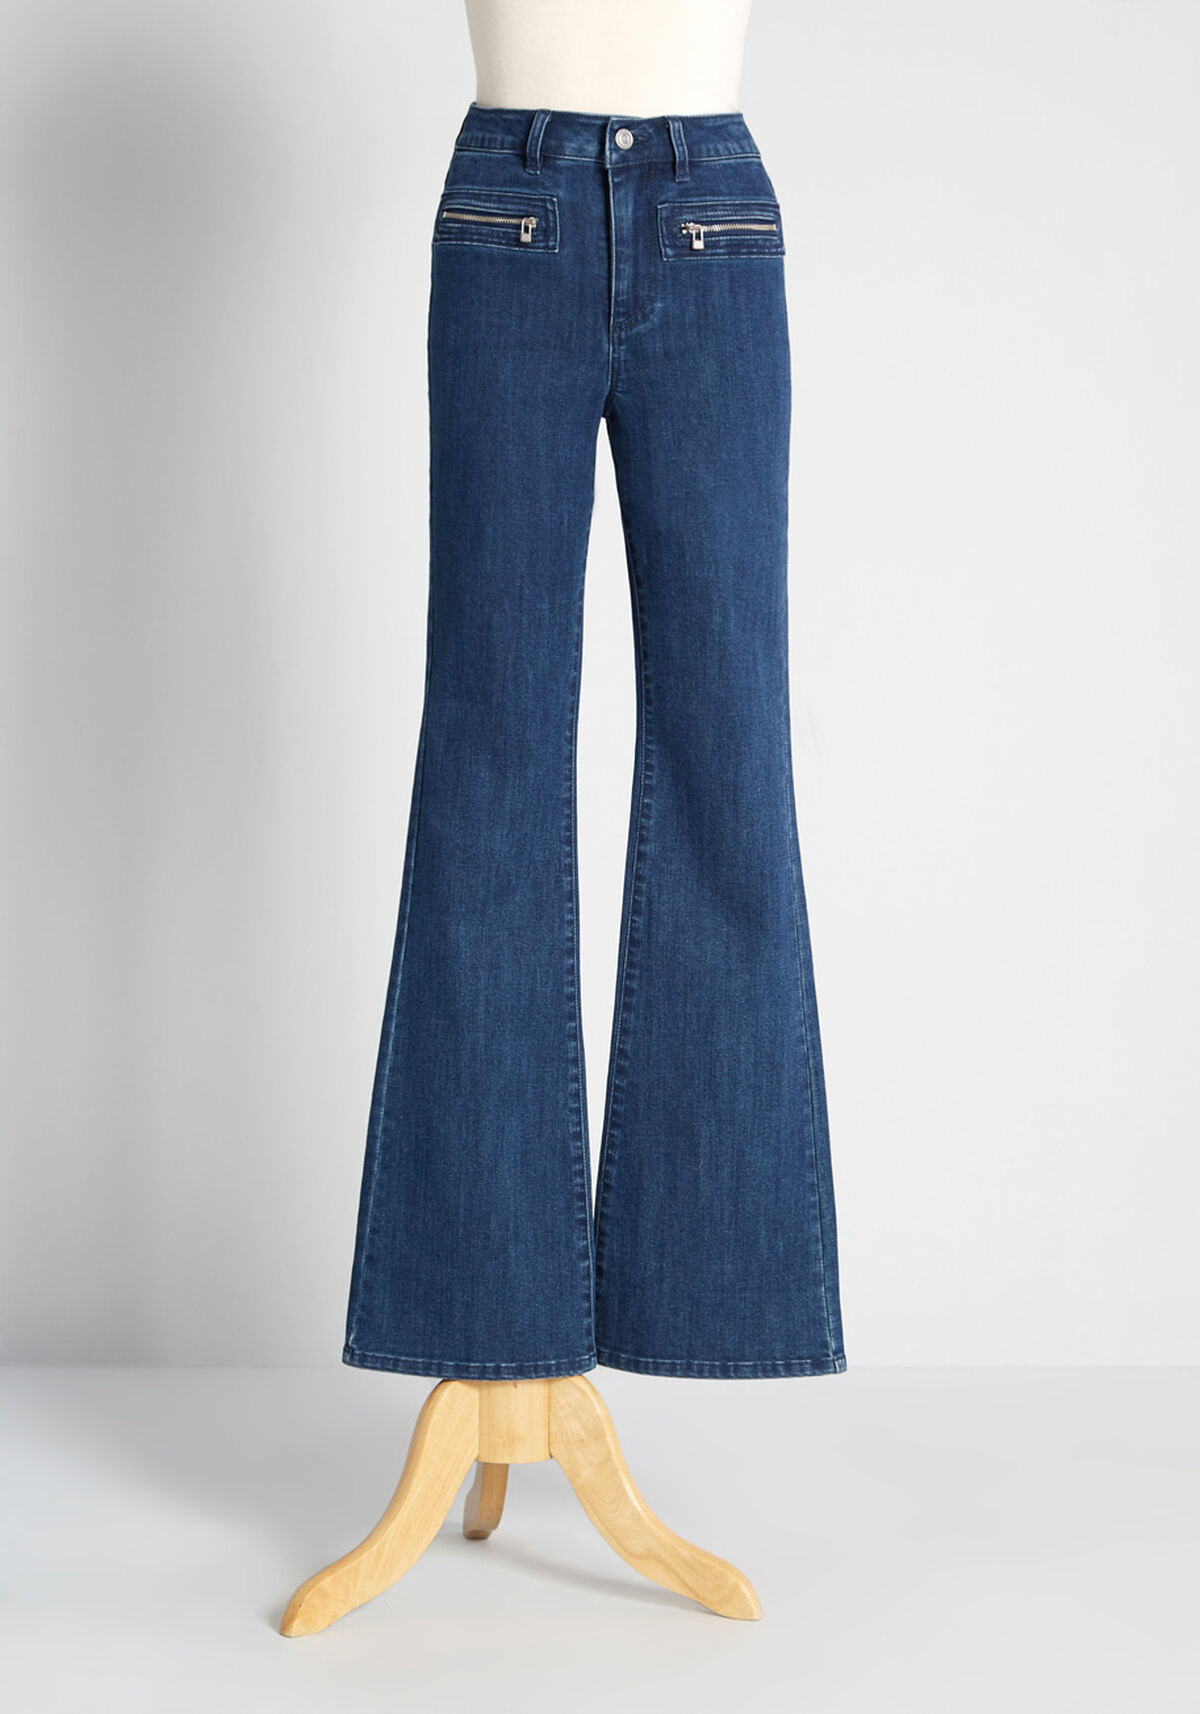 Blue flared jeans on mannequin